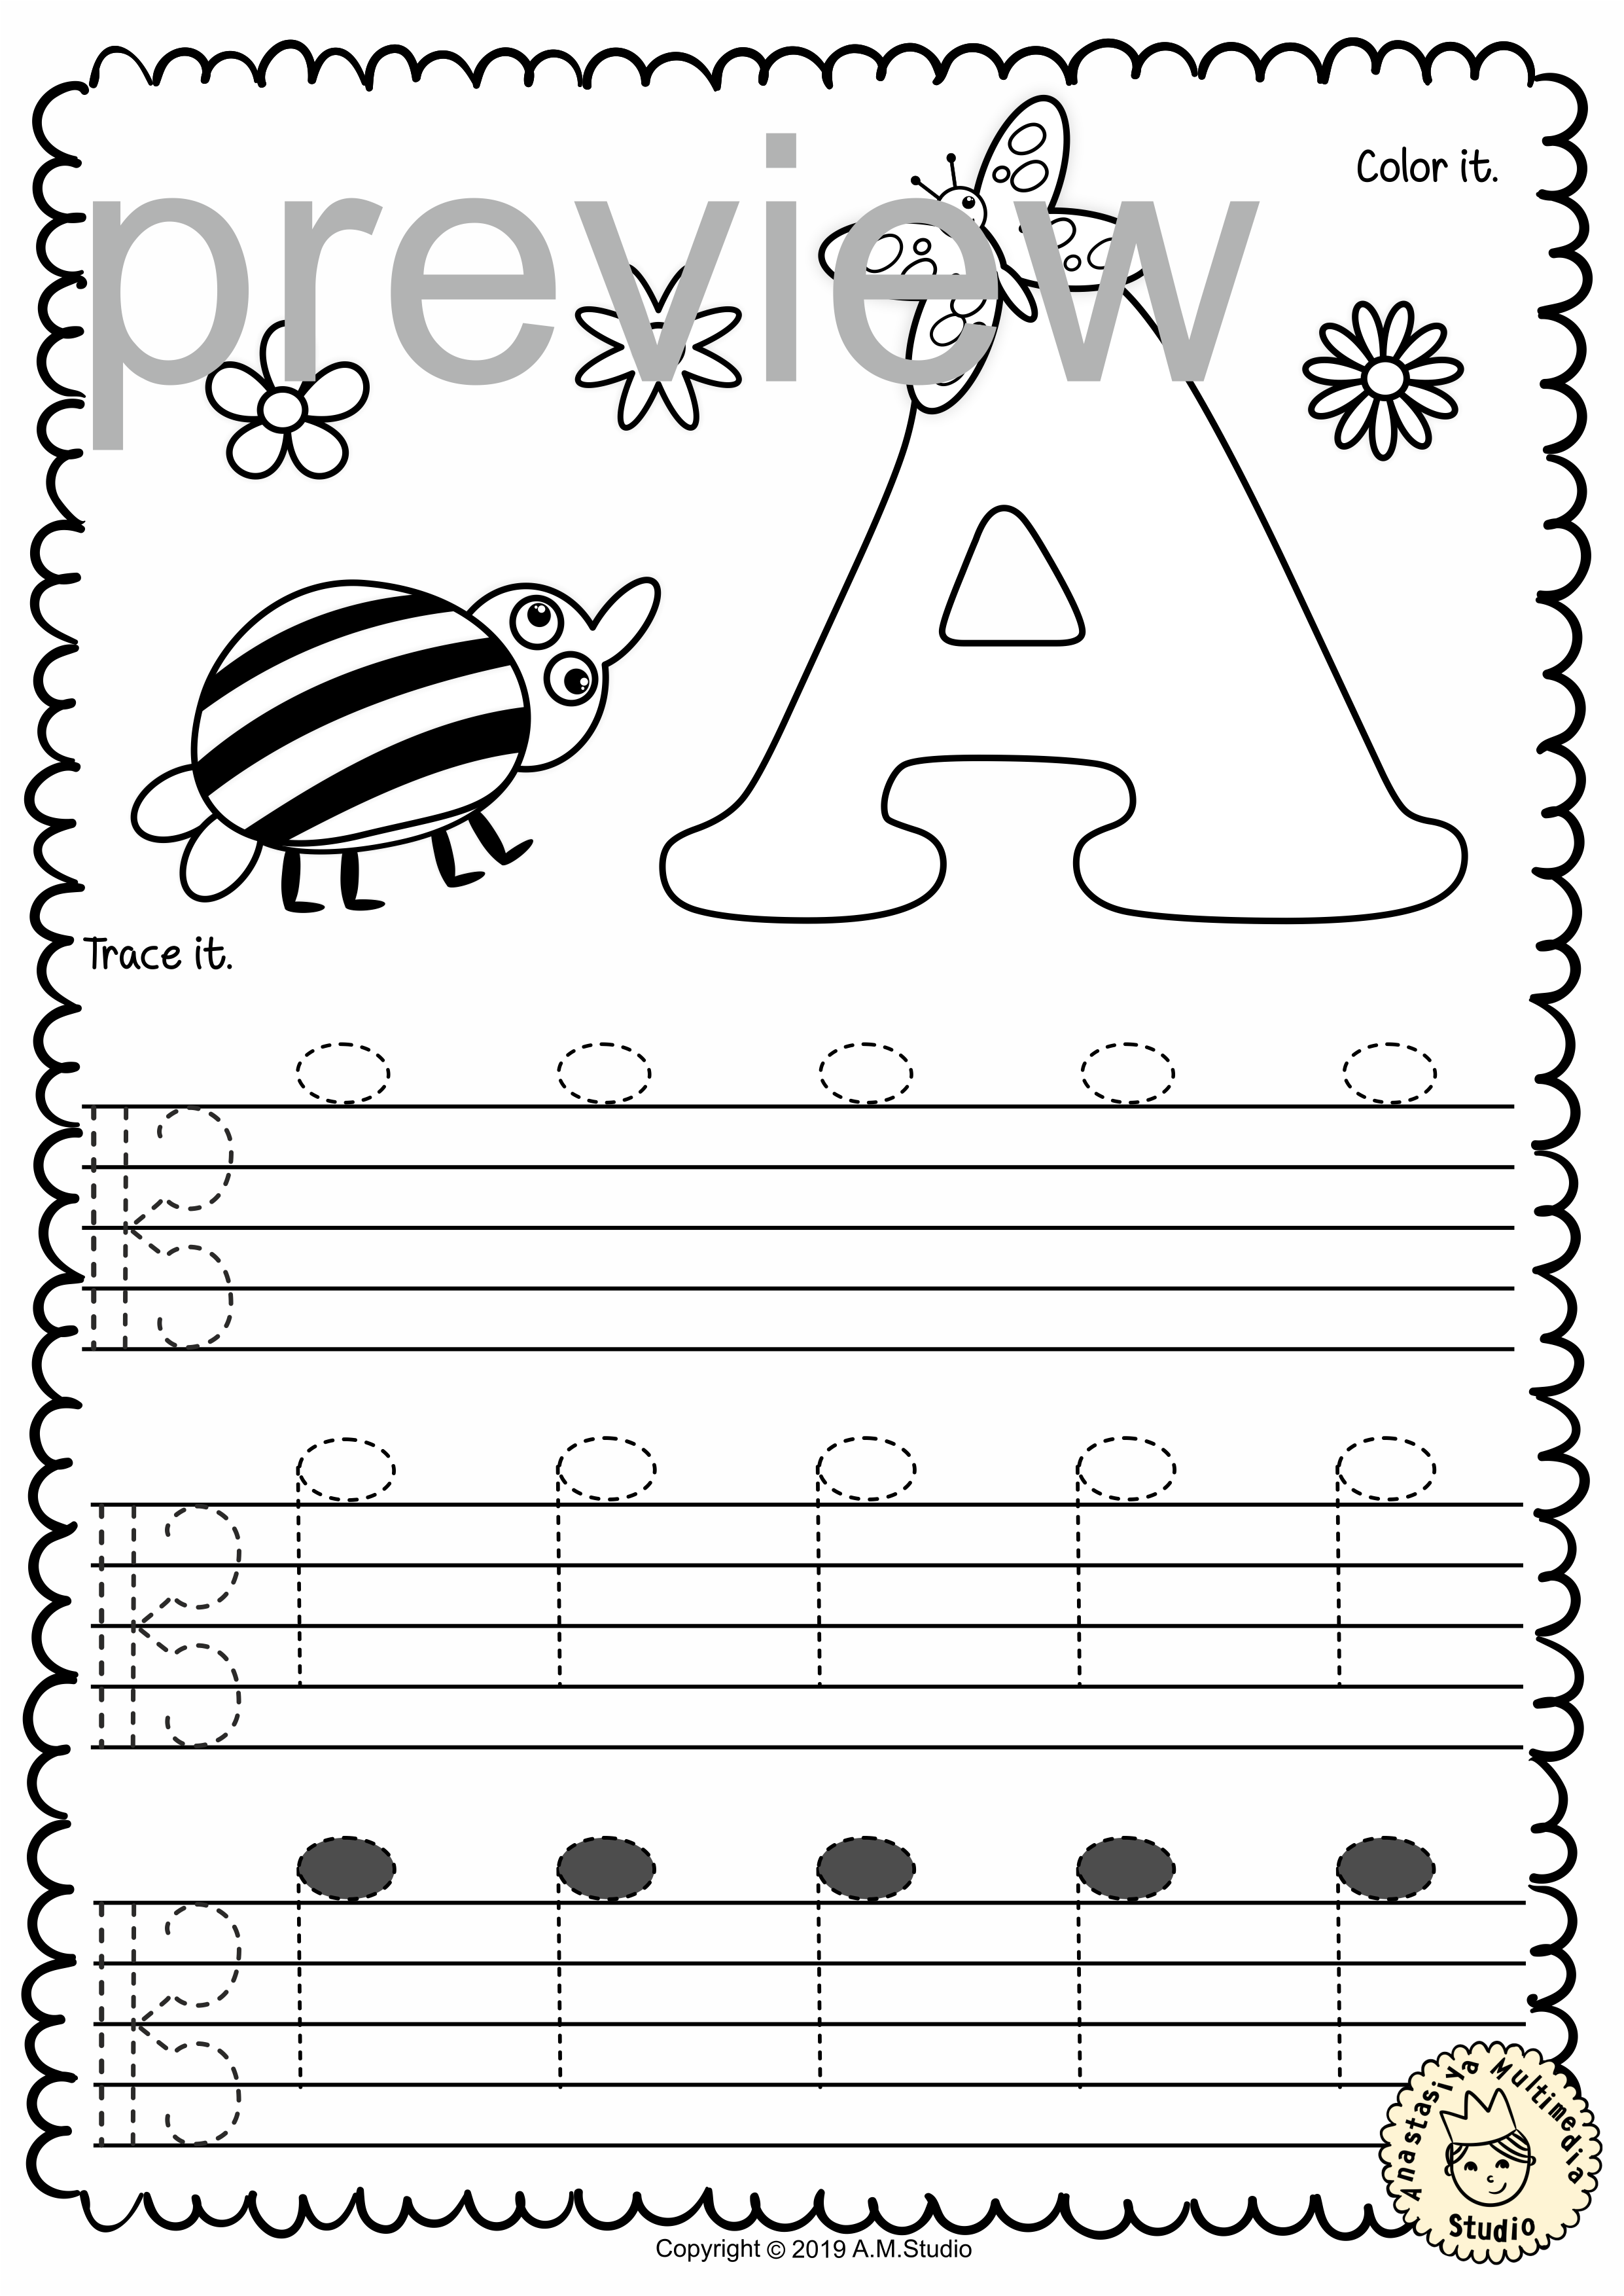 Alto Clef Tracing Music Notes Worksheets for Spring (img # 2)